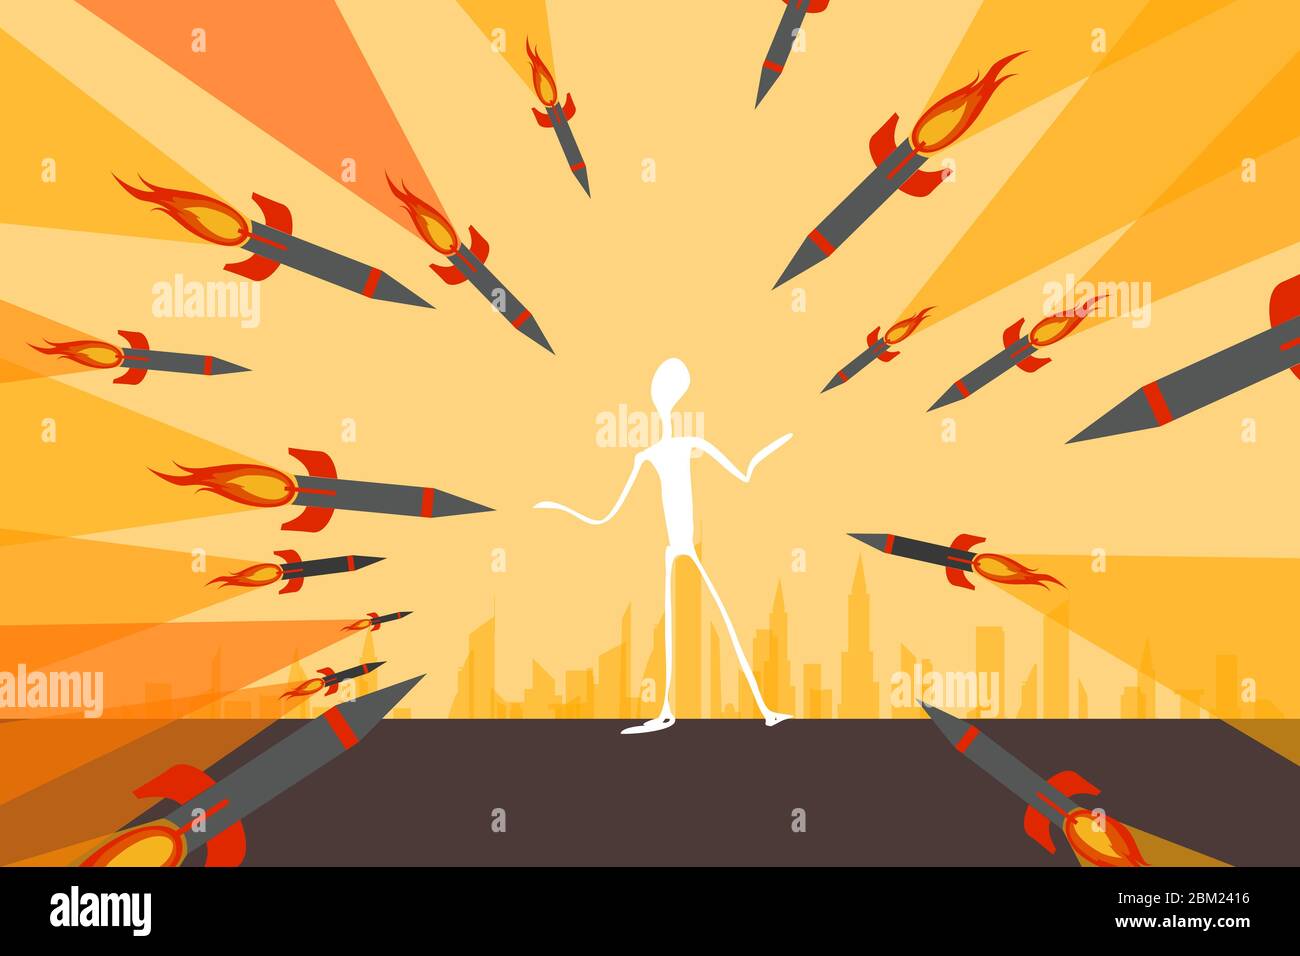 Calm person in a stressful situation, risk management and emergency management, concept. Many missiles and warheads aimed at one man, cartoon style. Stock Vector